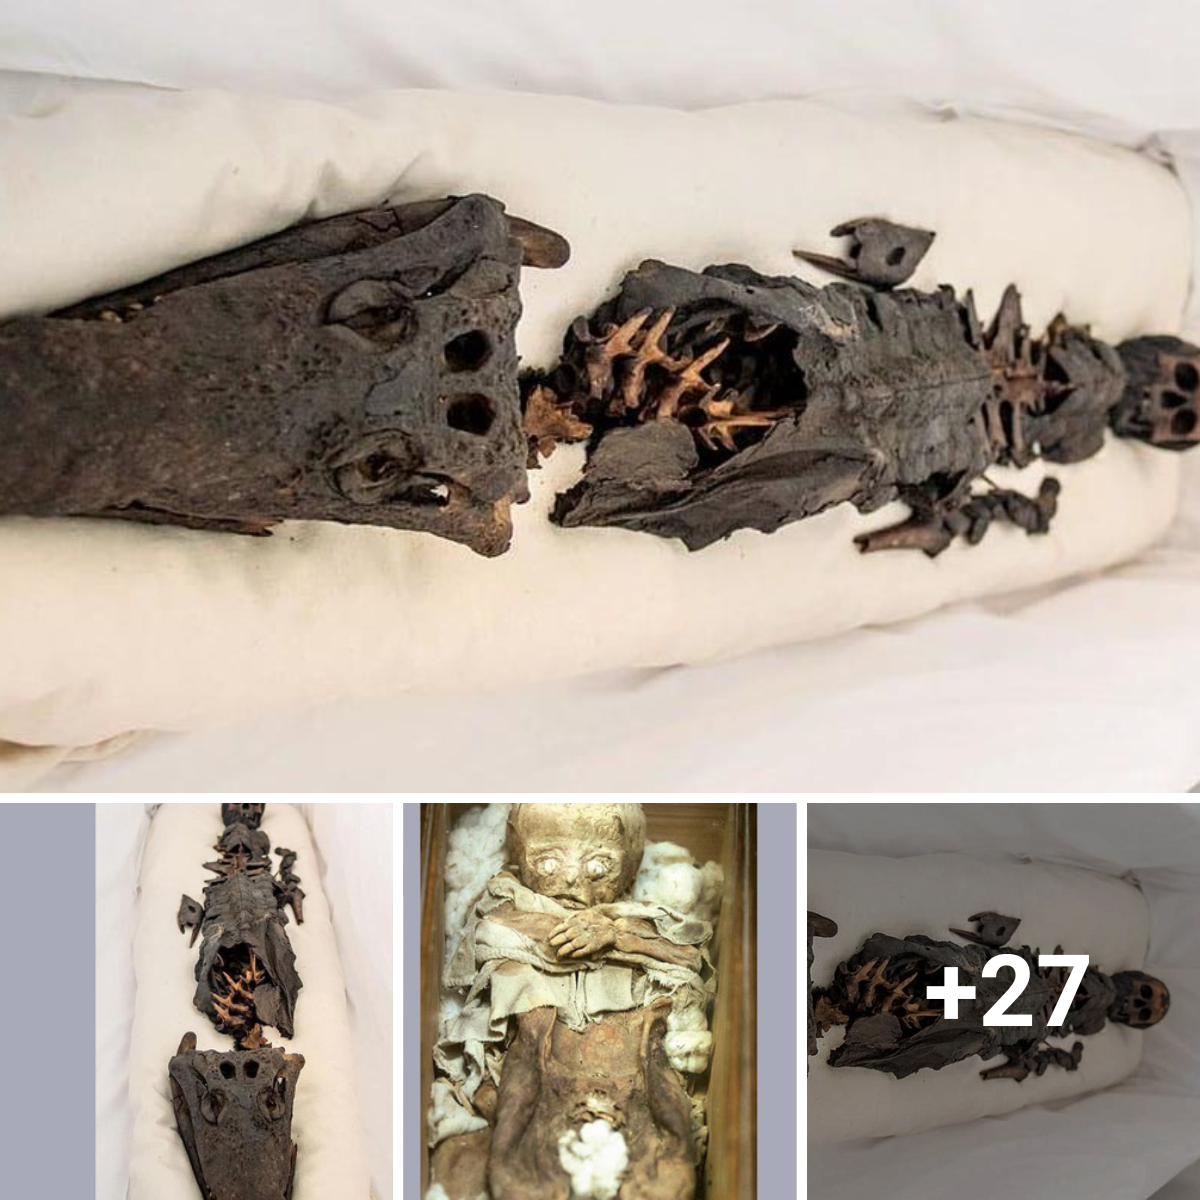 The odd narrative of the “two-headed mummy” was exposed following almost a century of concealment.